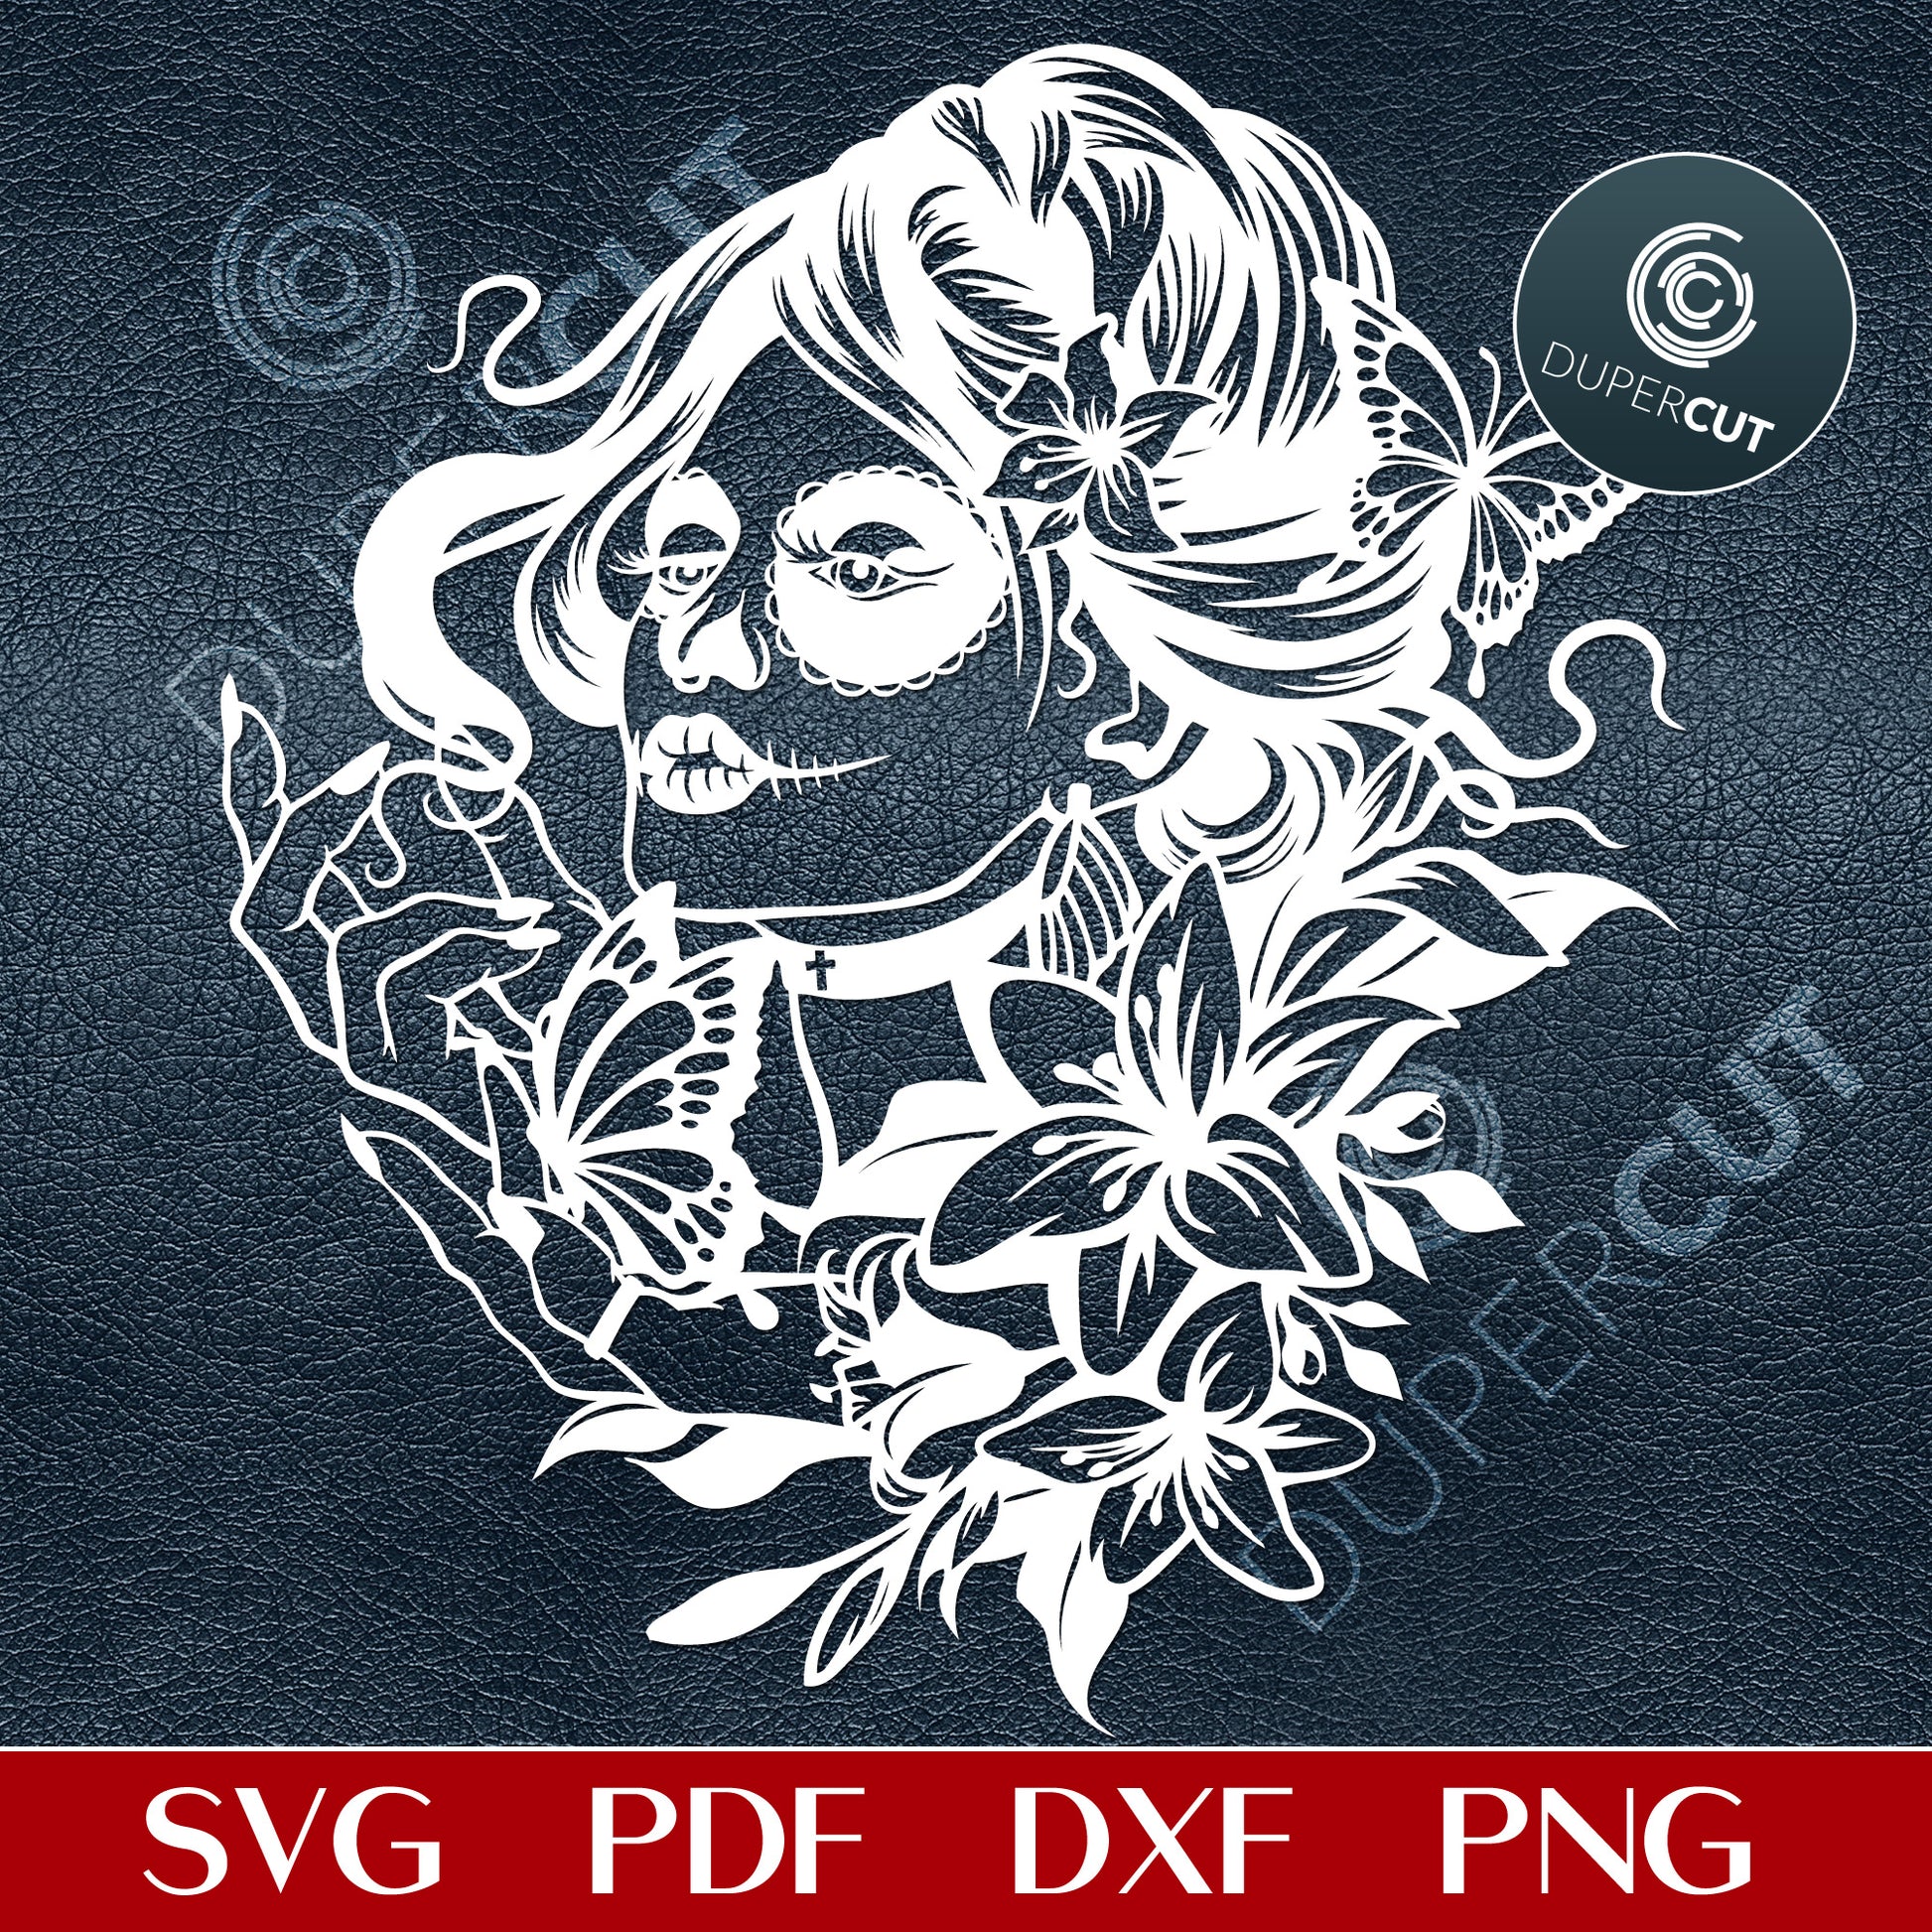 Girl Sugar Skull line art cutting files - steampunk skull SVG PNG DXF cutting files for Cricut, Glowforge, Silhouette cameo, laser engraving